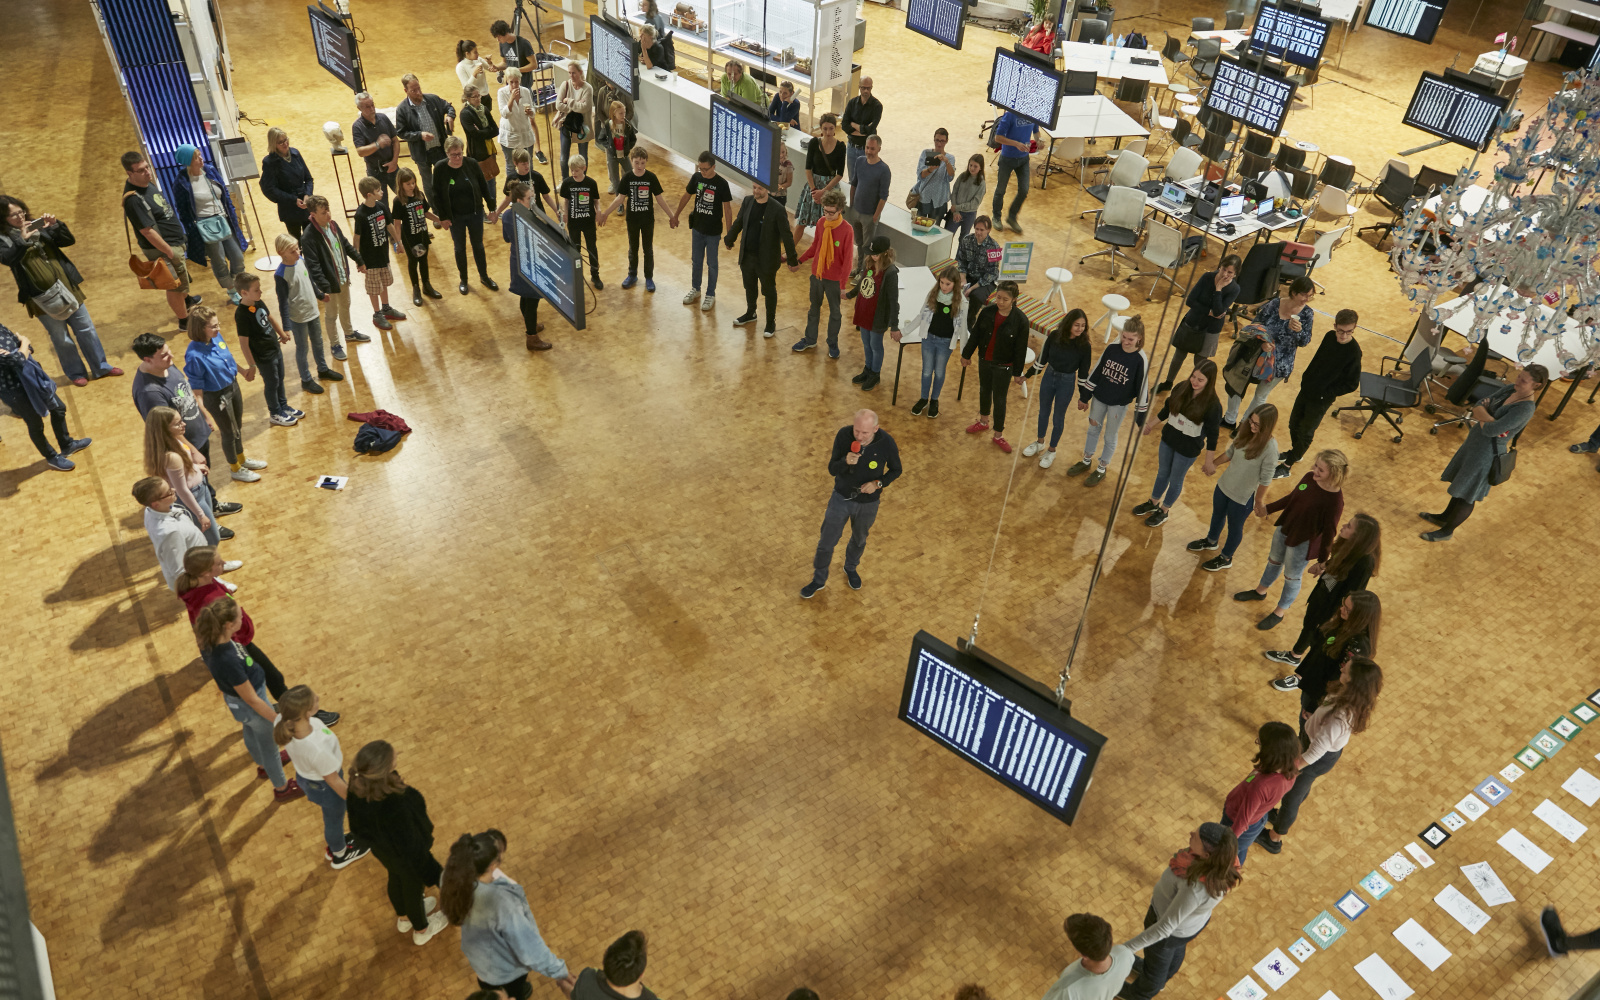 In the OpenHUB, several young people stand in a circle around a man who explains something to them.